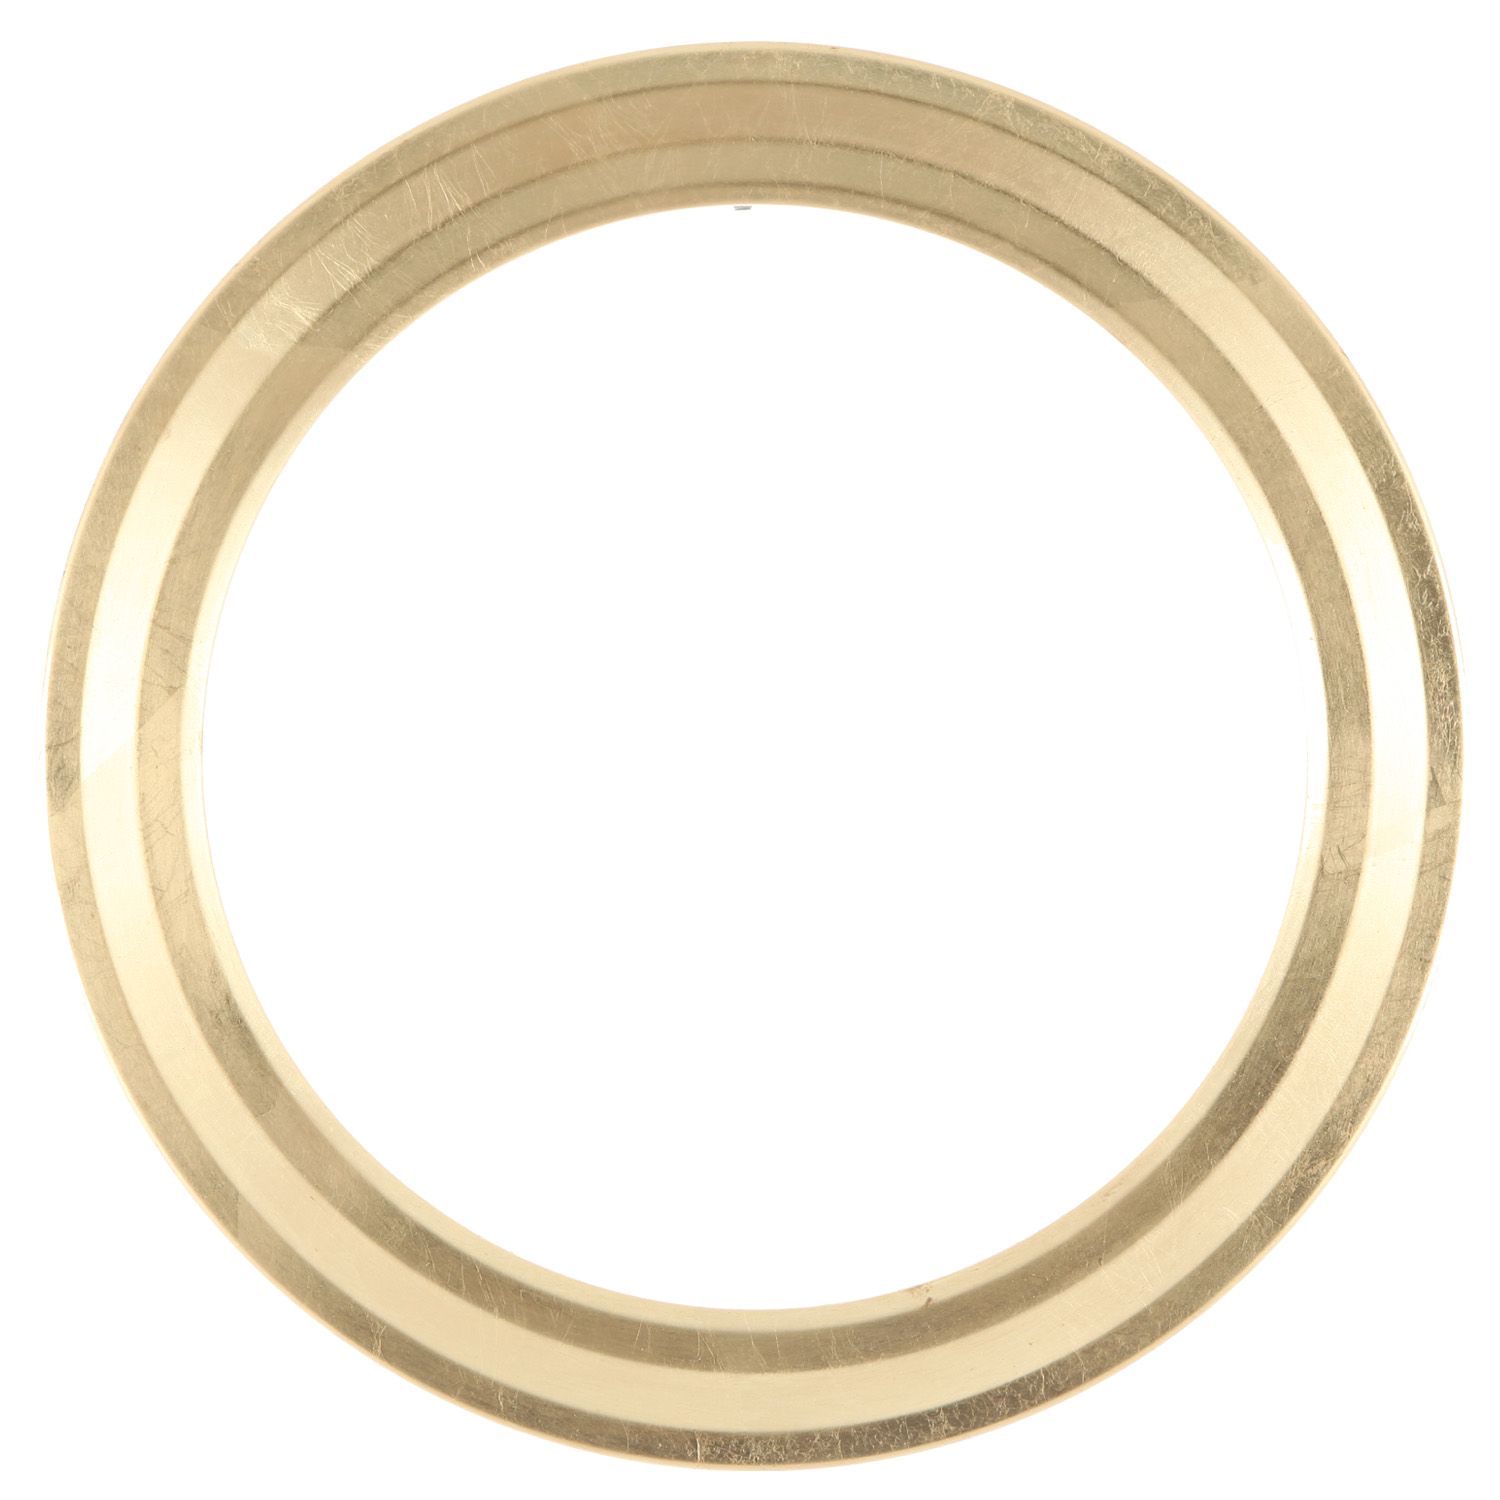  ArtToFrames 20 x 20 Inch 550 Circle Frame Desert Gold Picture  Frame Comes with Circle Acrylic Std, Circle Frame Back and Wall Hanging  Hardware (550C2020DG)